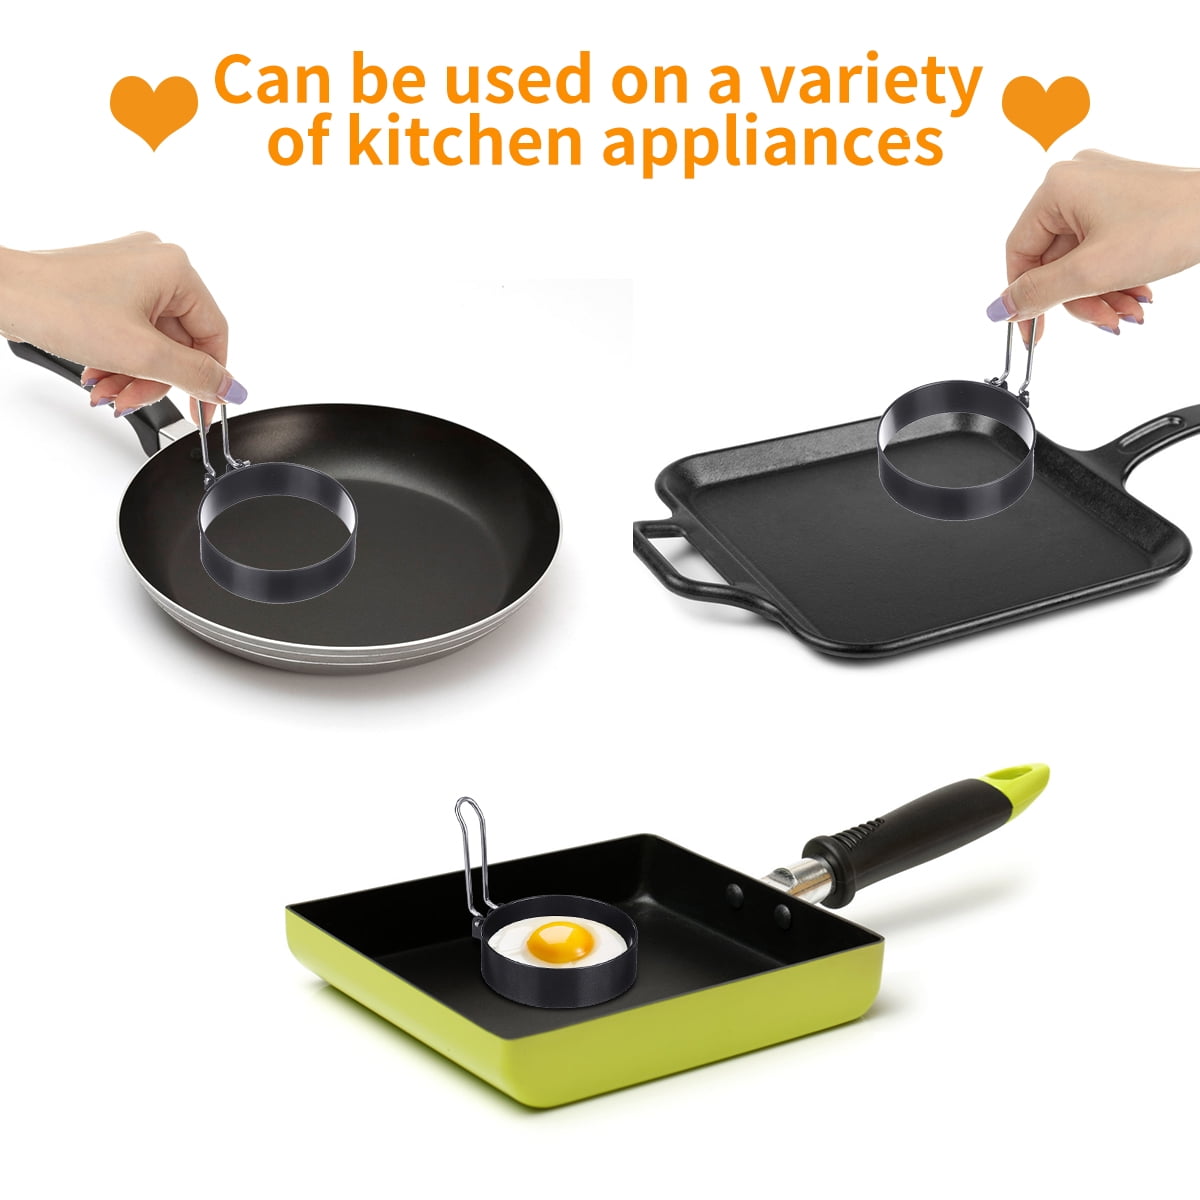 Tuke Breakfast Omelette Mold Silicone Egg Pancake Ring Shaper Cooking Tool DIY Kitchen Accessories Gadget Egg Fired Mould (RABBIT)